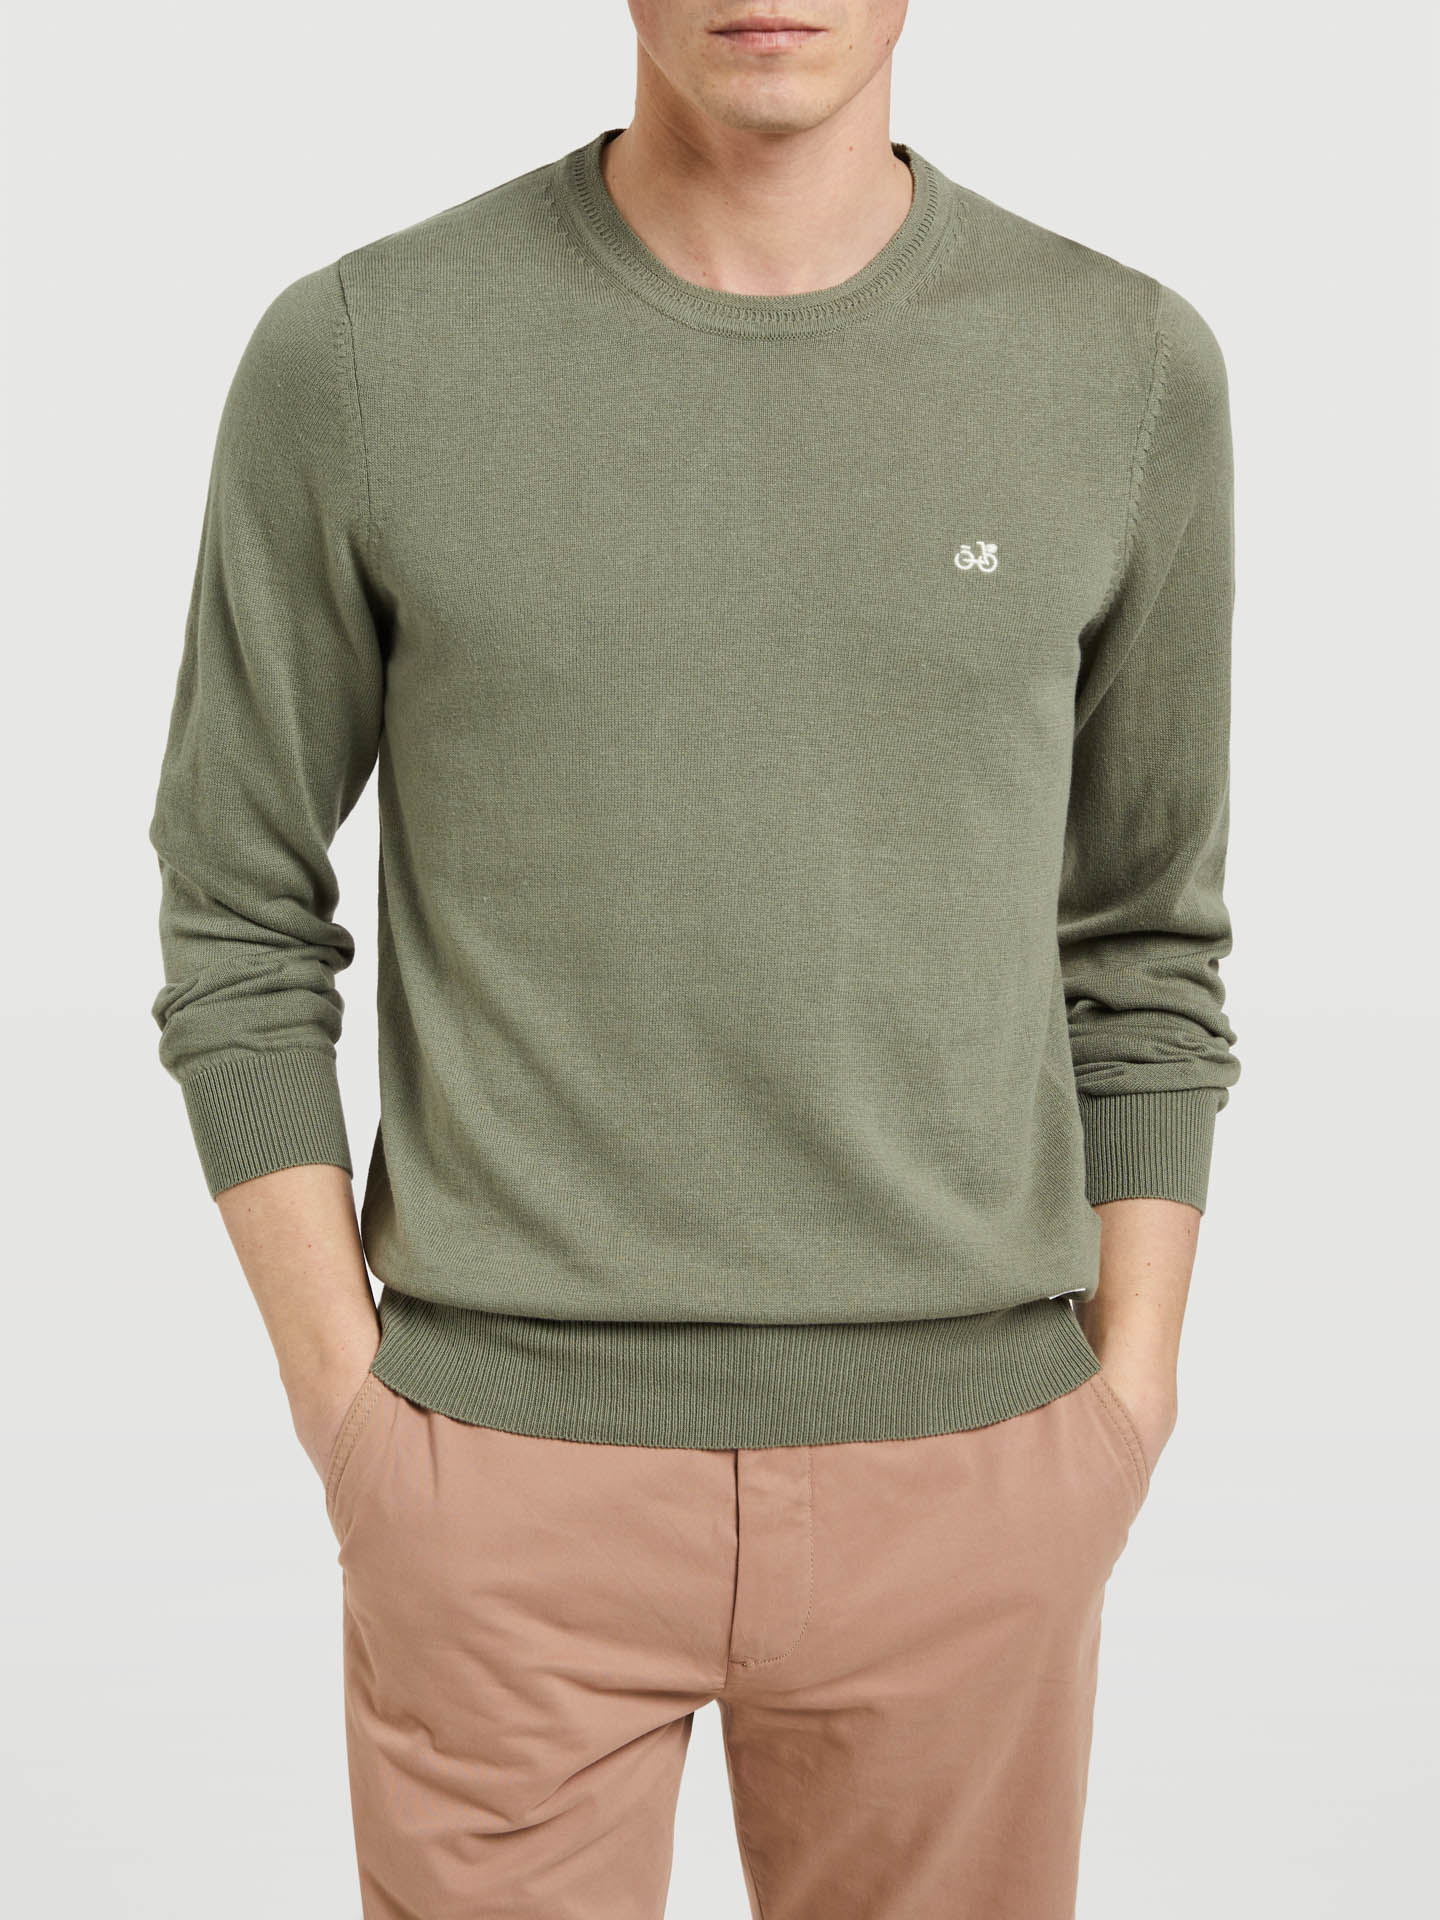 Sweater Olive Green Casual Man